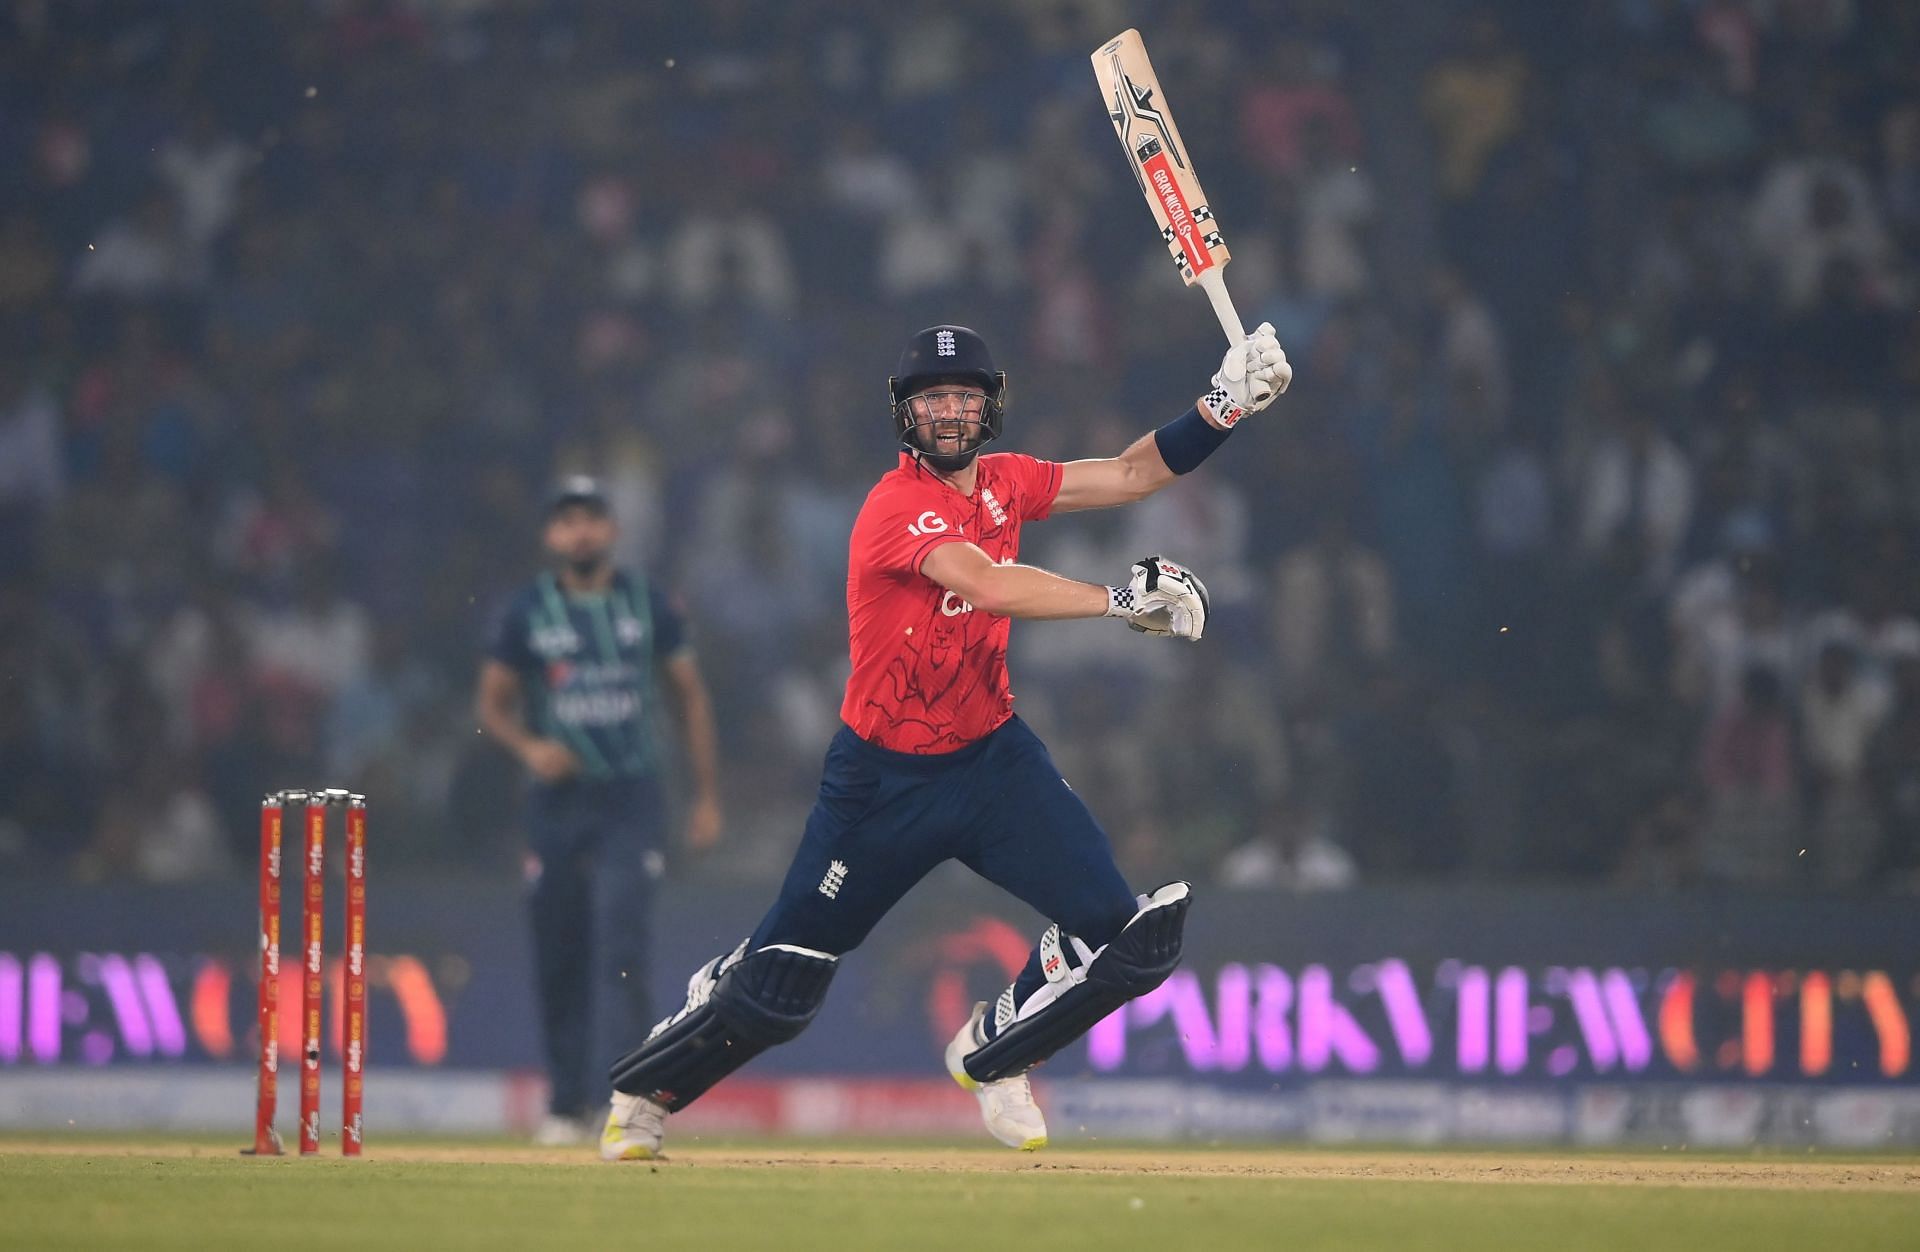 Chris Woakes in action during the 5th T20I between Pakistan and England at Gaddafi Stadium in Lahore, Pakistan.